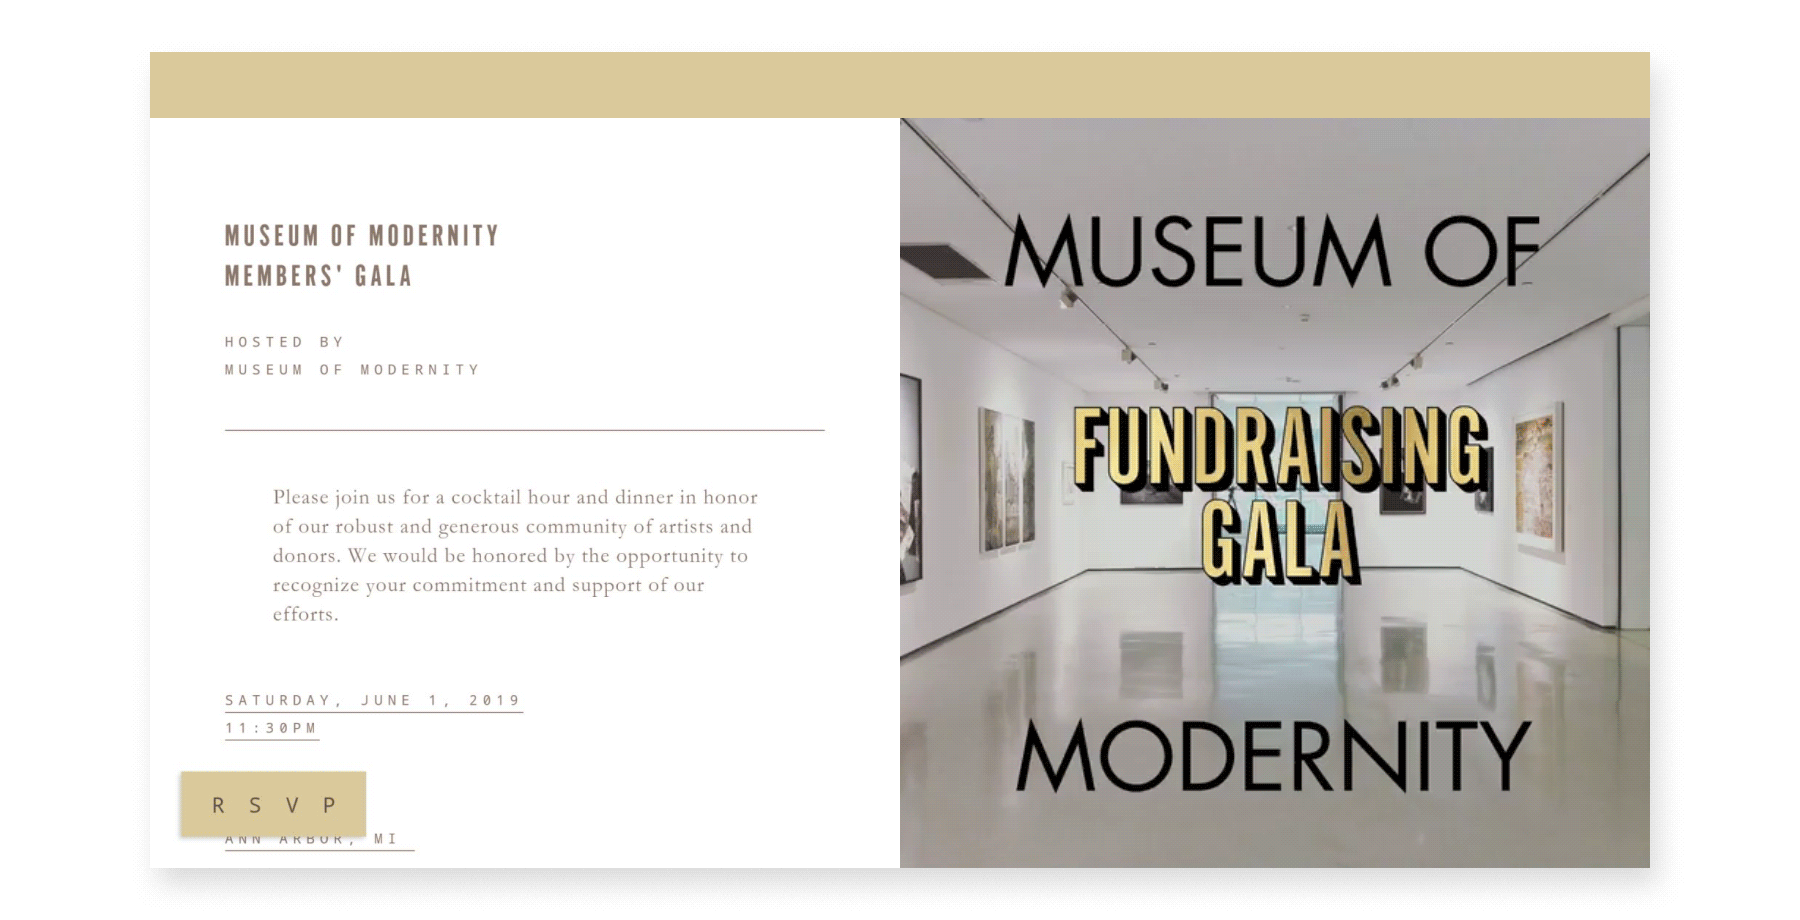 A gold bordered online invite features details of the event on the left with an RSVP button on the bottom. On the right side of the invite, bold type reads “museum of modernity fundraising” gala imposed on an art gallery image.